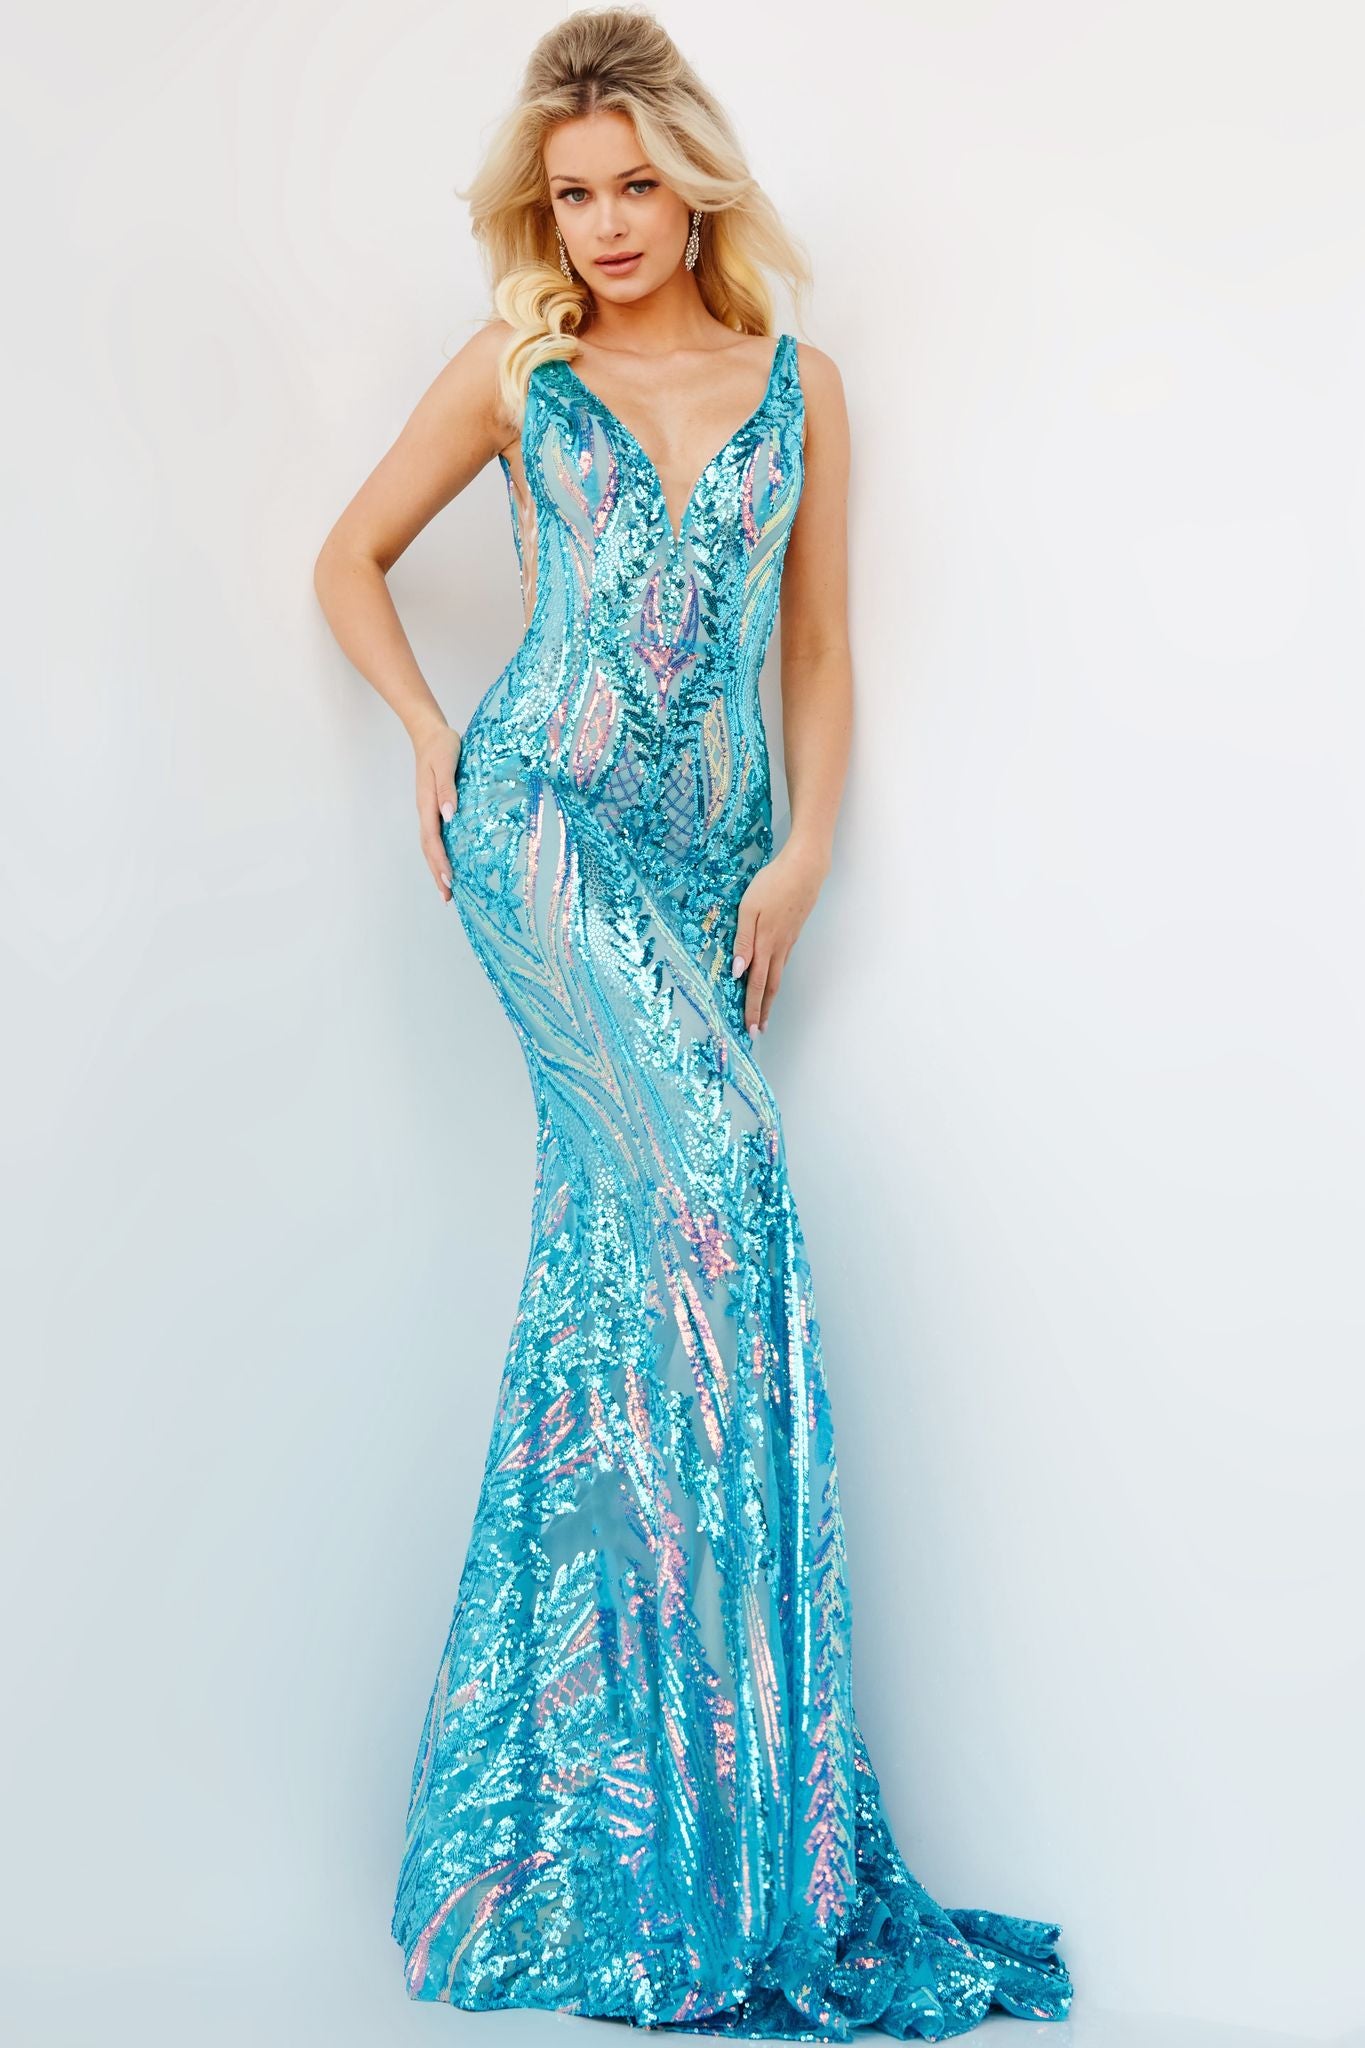 Jovani 22770 Long Fitted Iridescent Mermaid Prom Dress V Neck Sheer Sequin Pageant Gown The Jovani 22770 dress features an iridescent sequin finish, a long fitted silhouette, plus a deep V neck and sheer back. Crafted with premium materials, this stunning prom gown is perfect for any special occasion.  Sizes: 00-24  Colors: Iridescent Jade, Iridescent Hot Pink